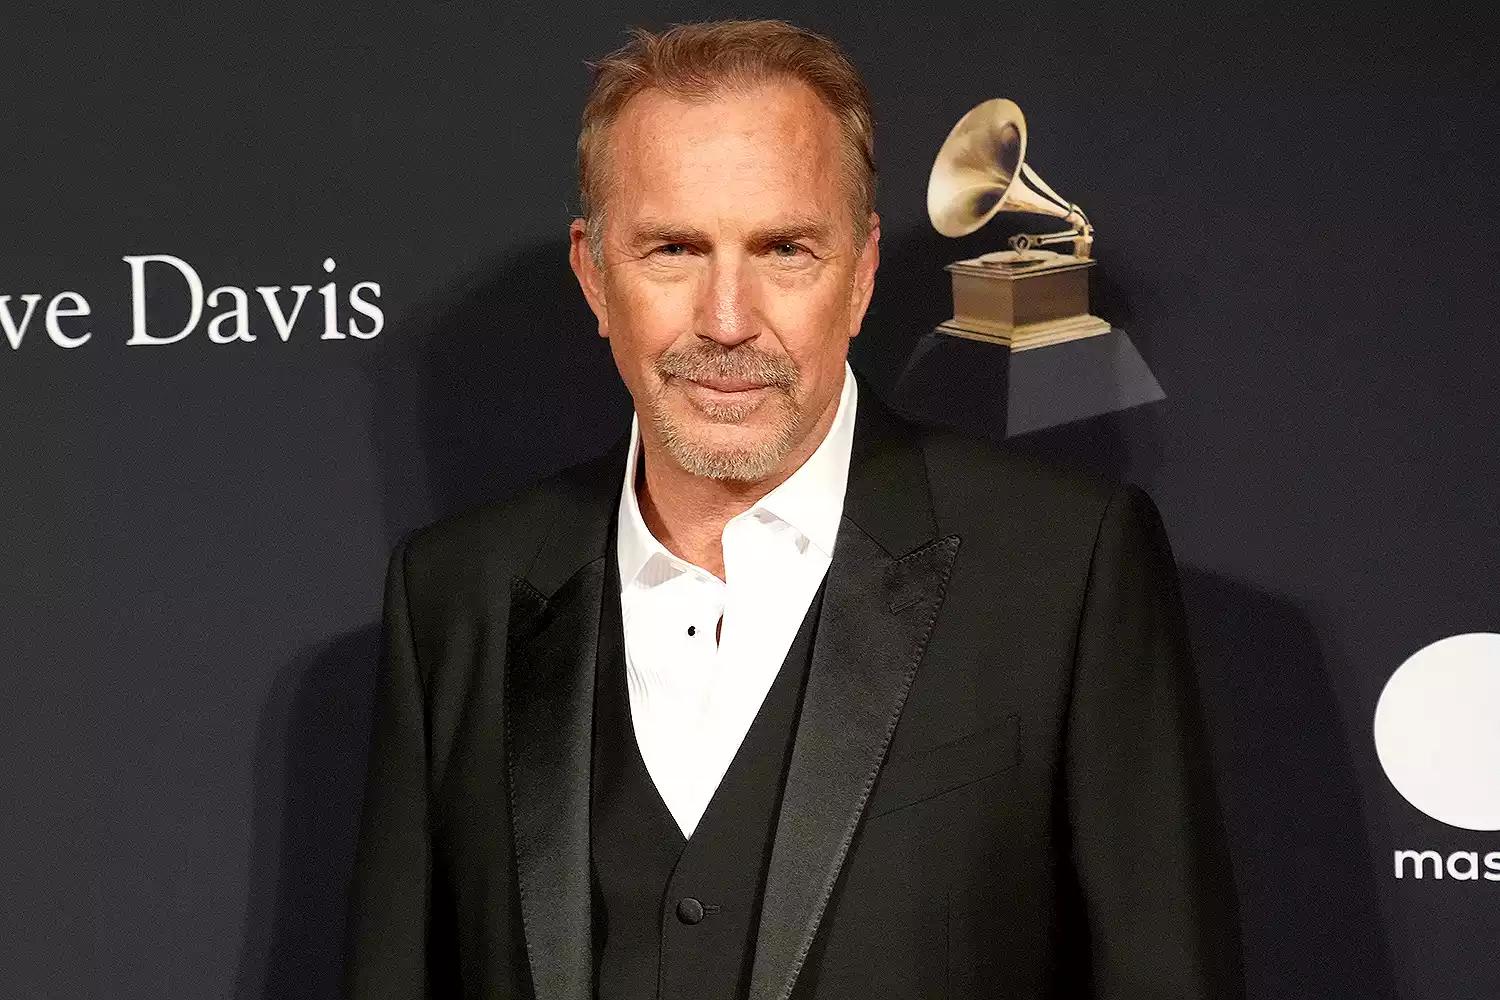 Inside Kevin Costner's Divorce Drama: Why Christine Questions Their $400M Agreement